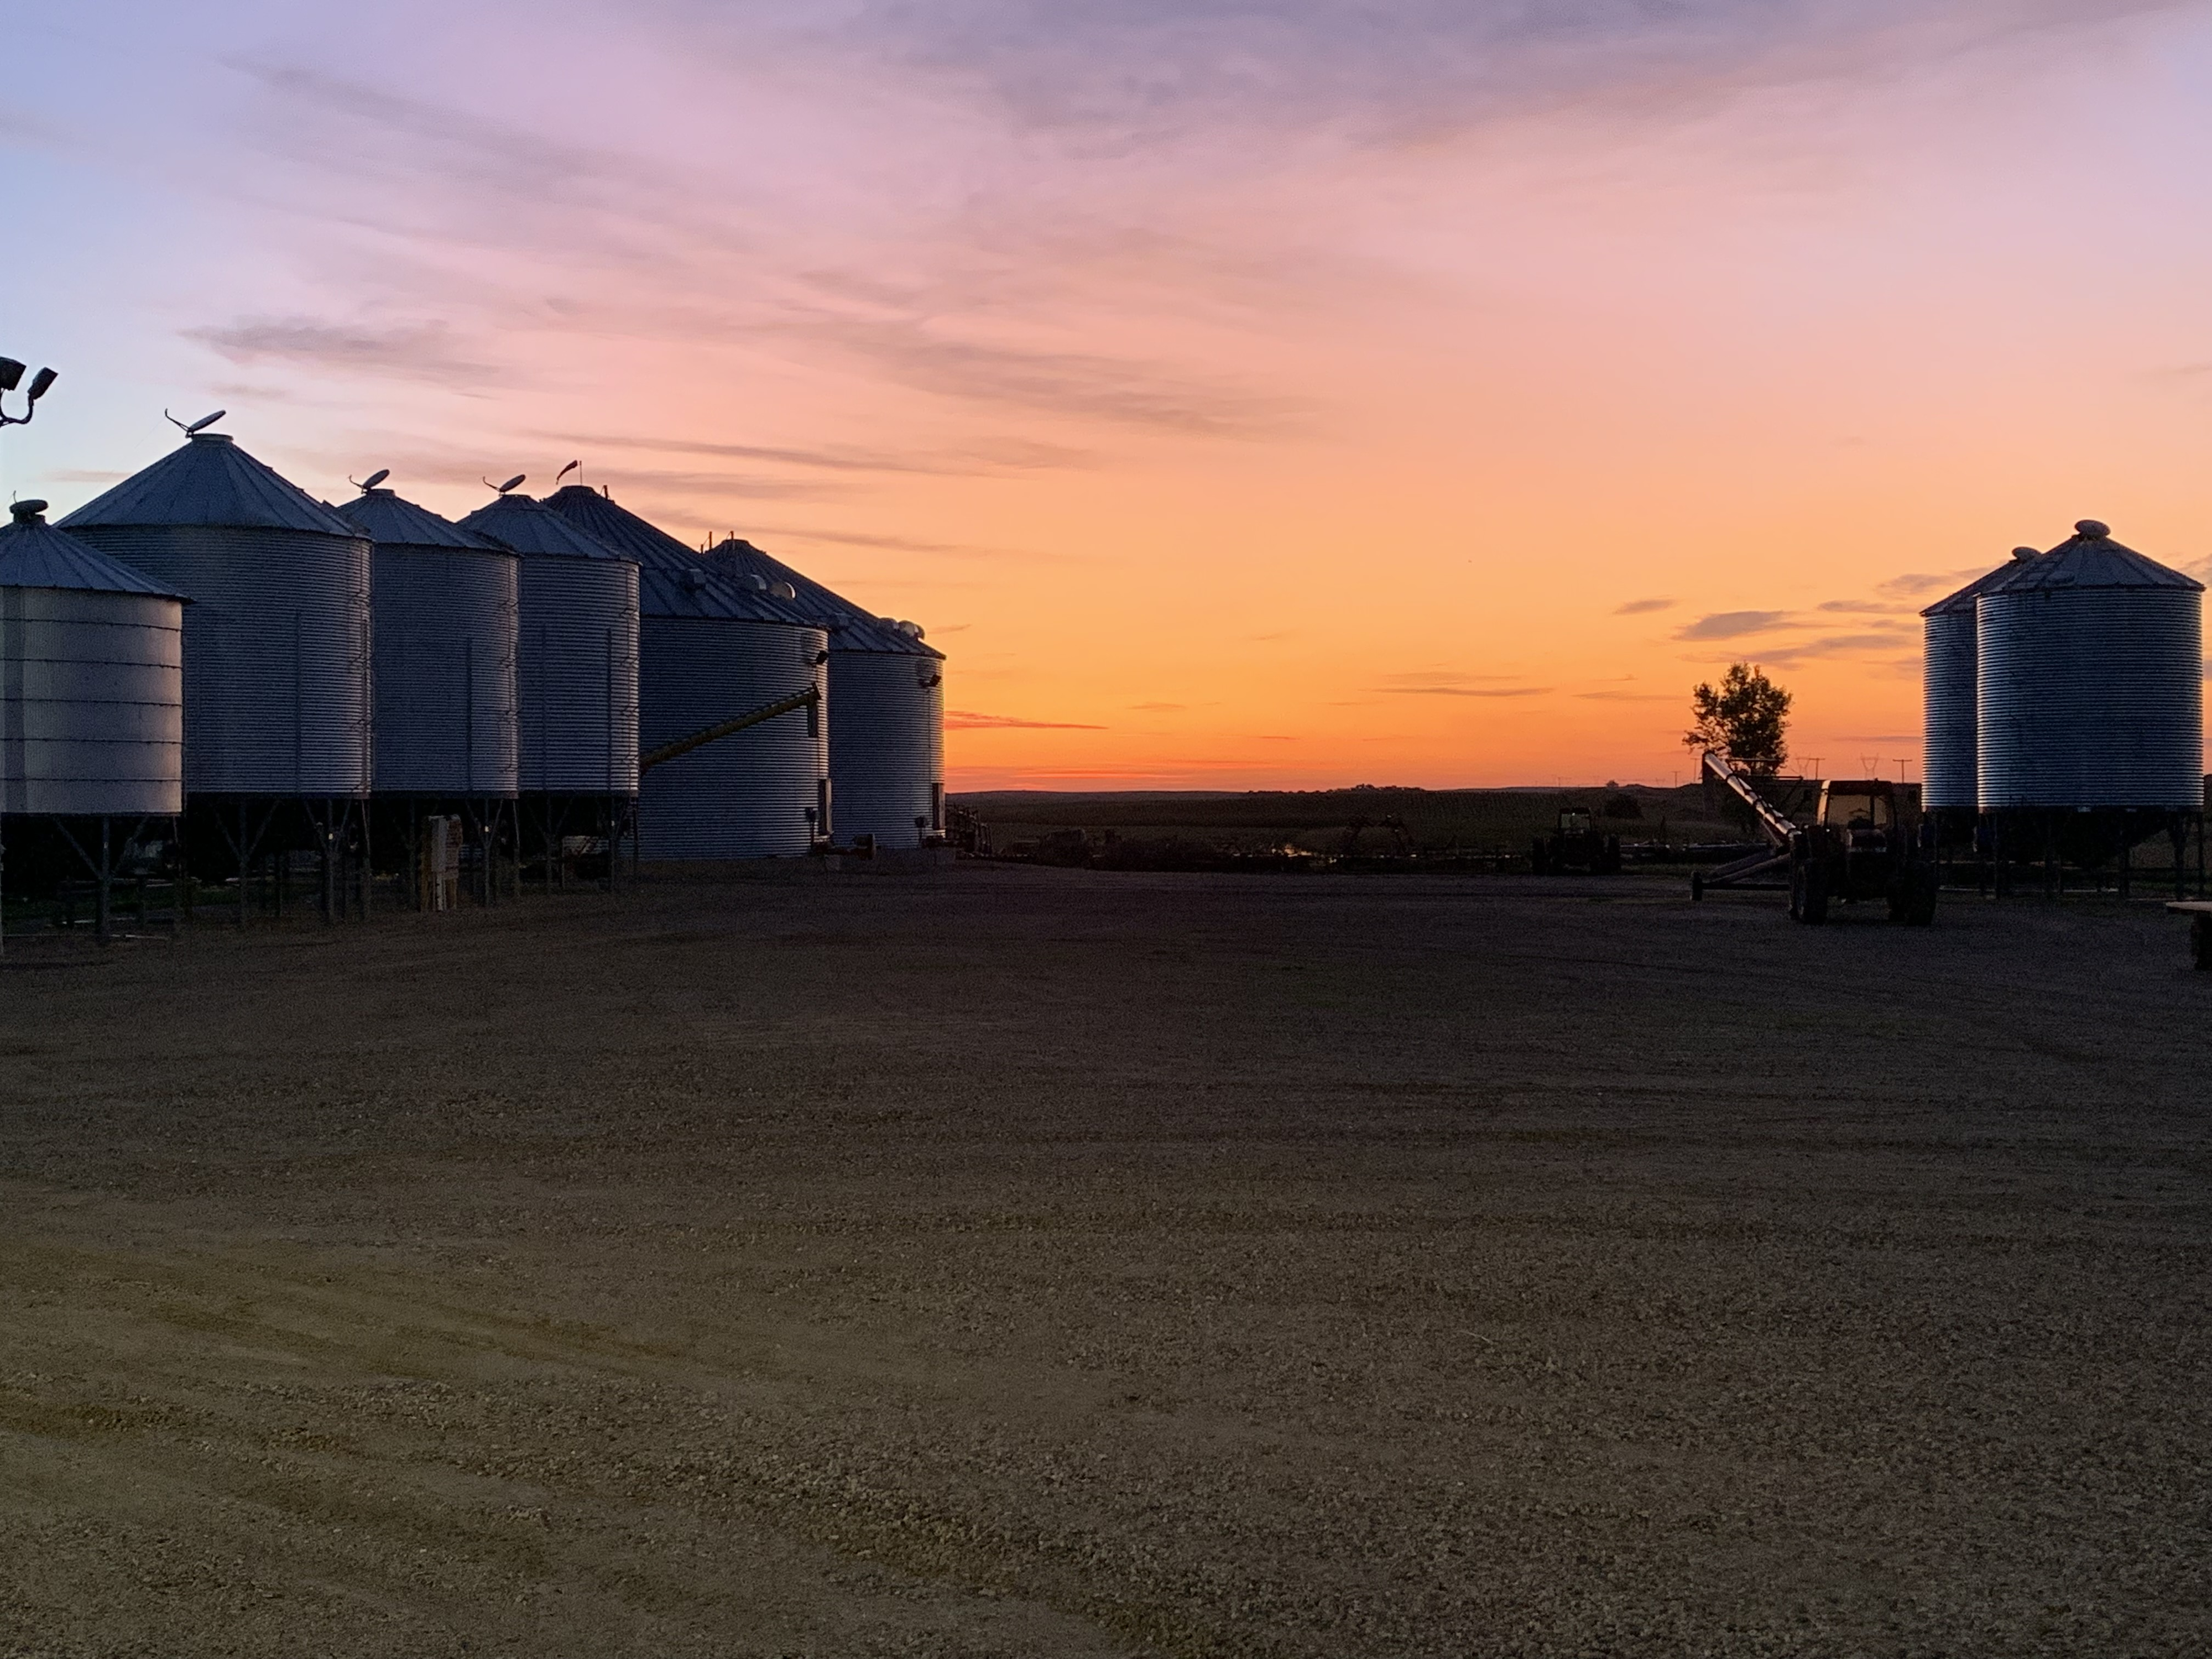 Afternoon Ag News, June 18, 2021: Producers have concerns over possible increases in estate and capital gains taxes